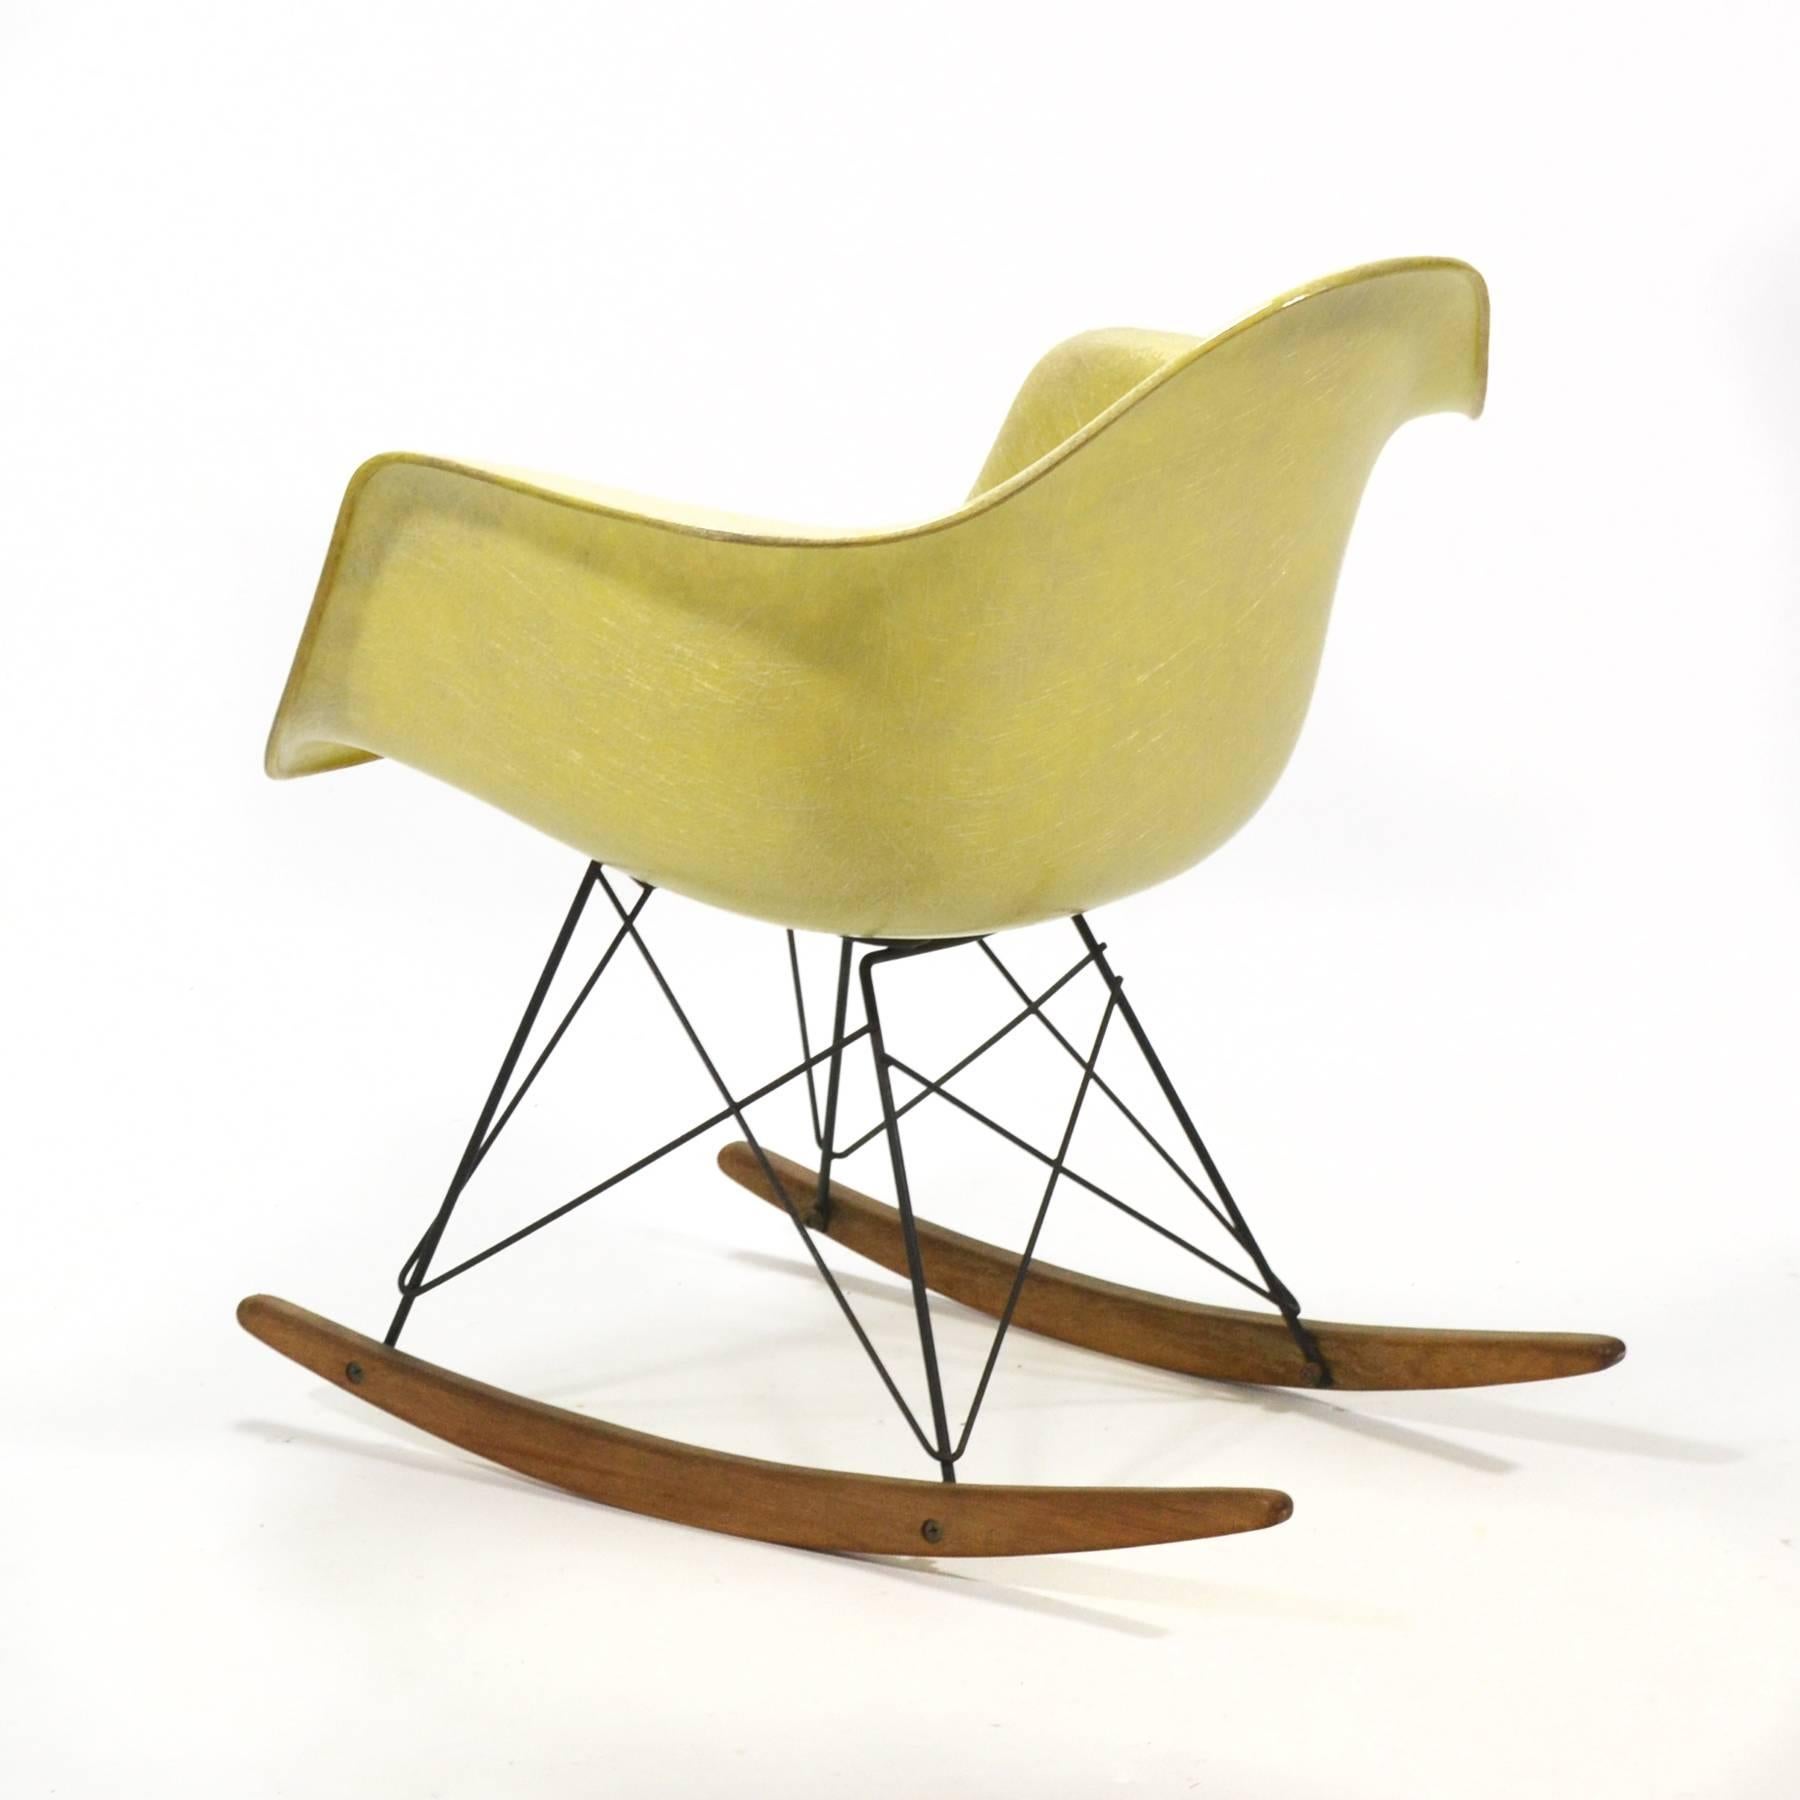 Eames Lemon Yellow Zenith Rope-Edge, RAR Rocker by Herman Miller In Good Condition For Sale In Highland, IN